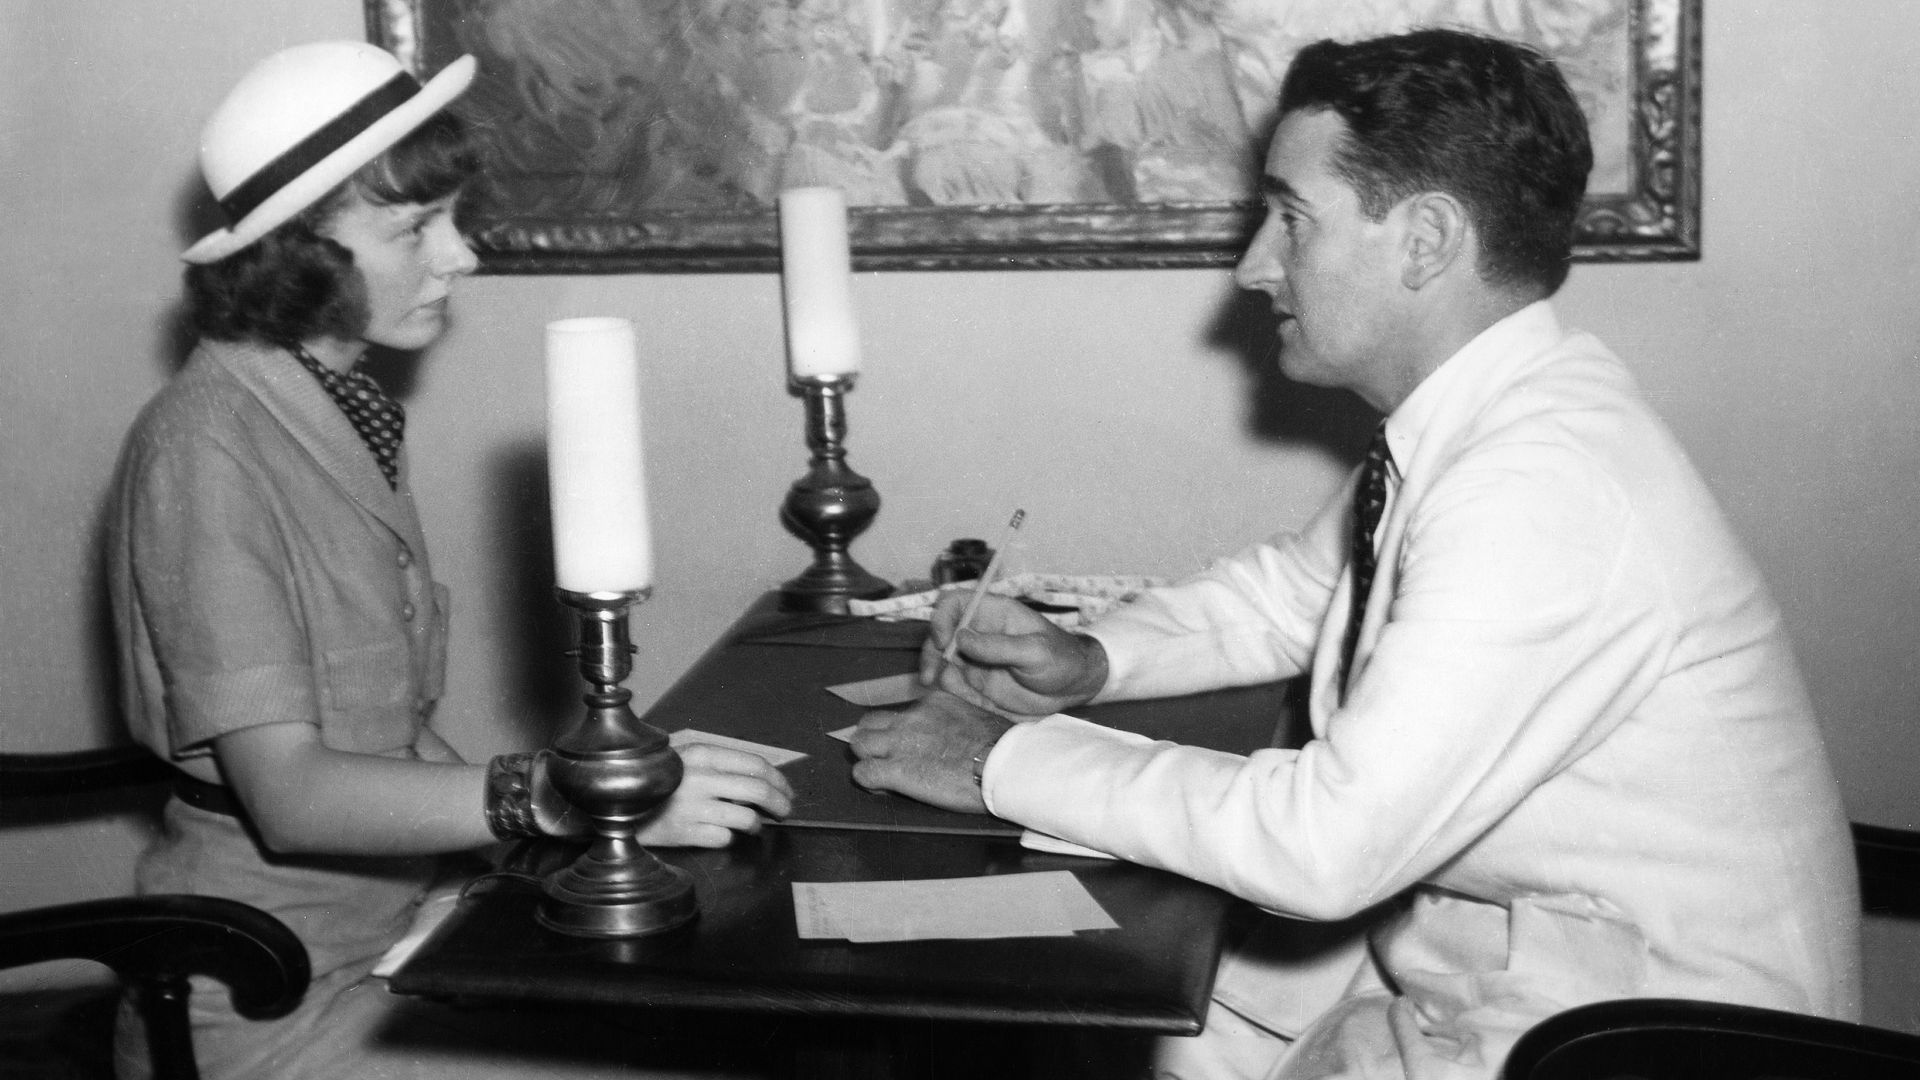 A black and white photo of a man and a woman conversing across a table